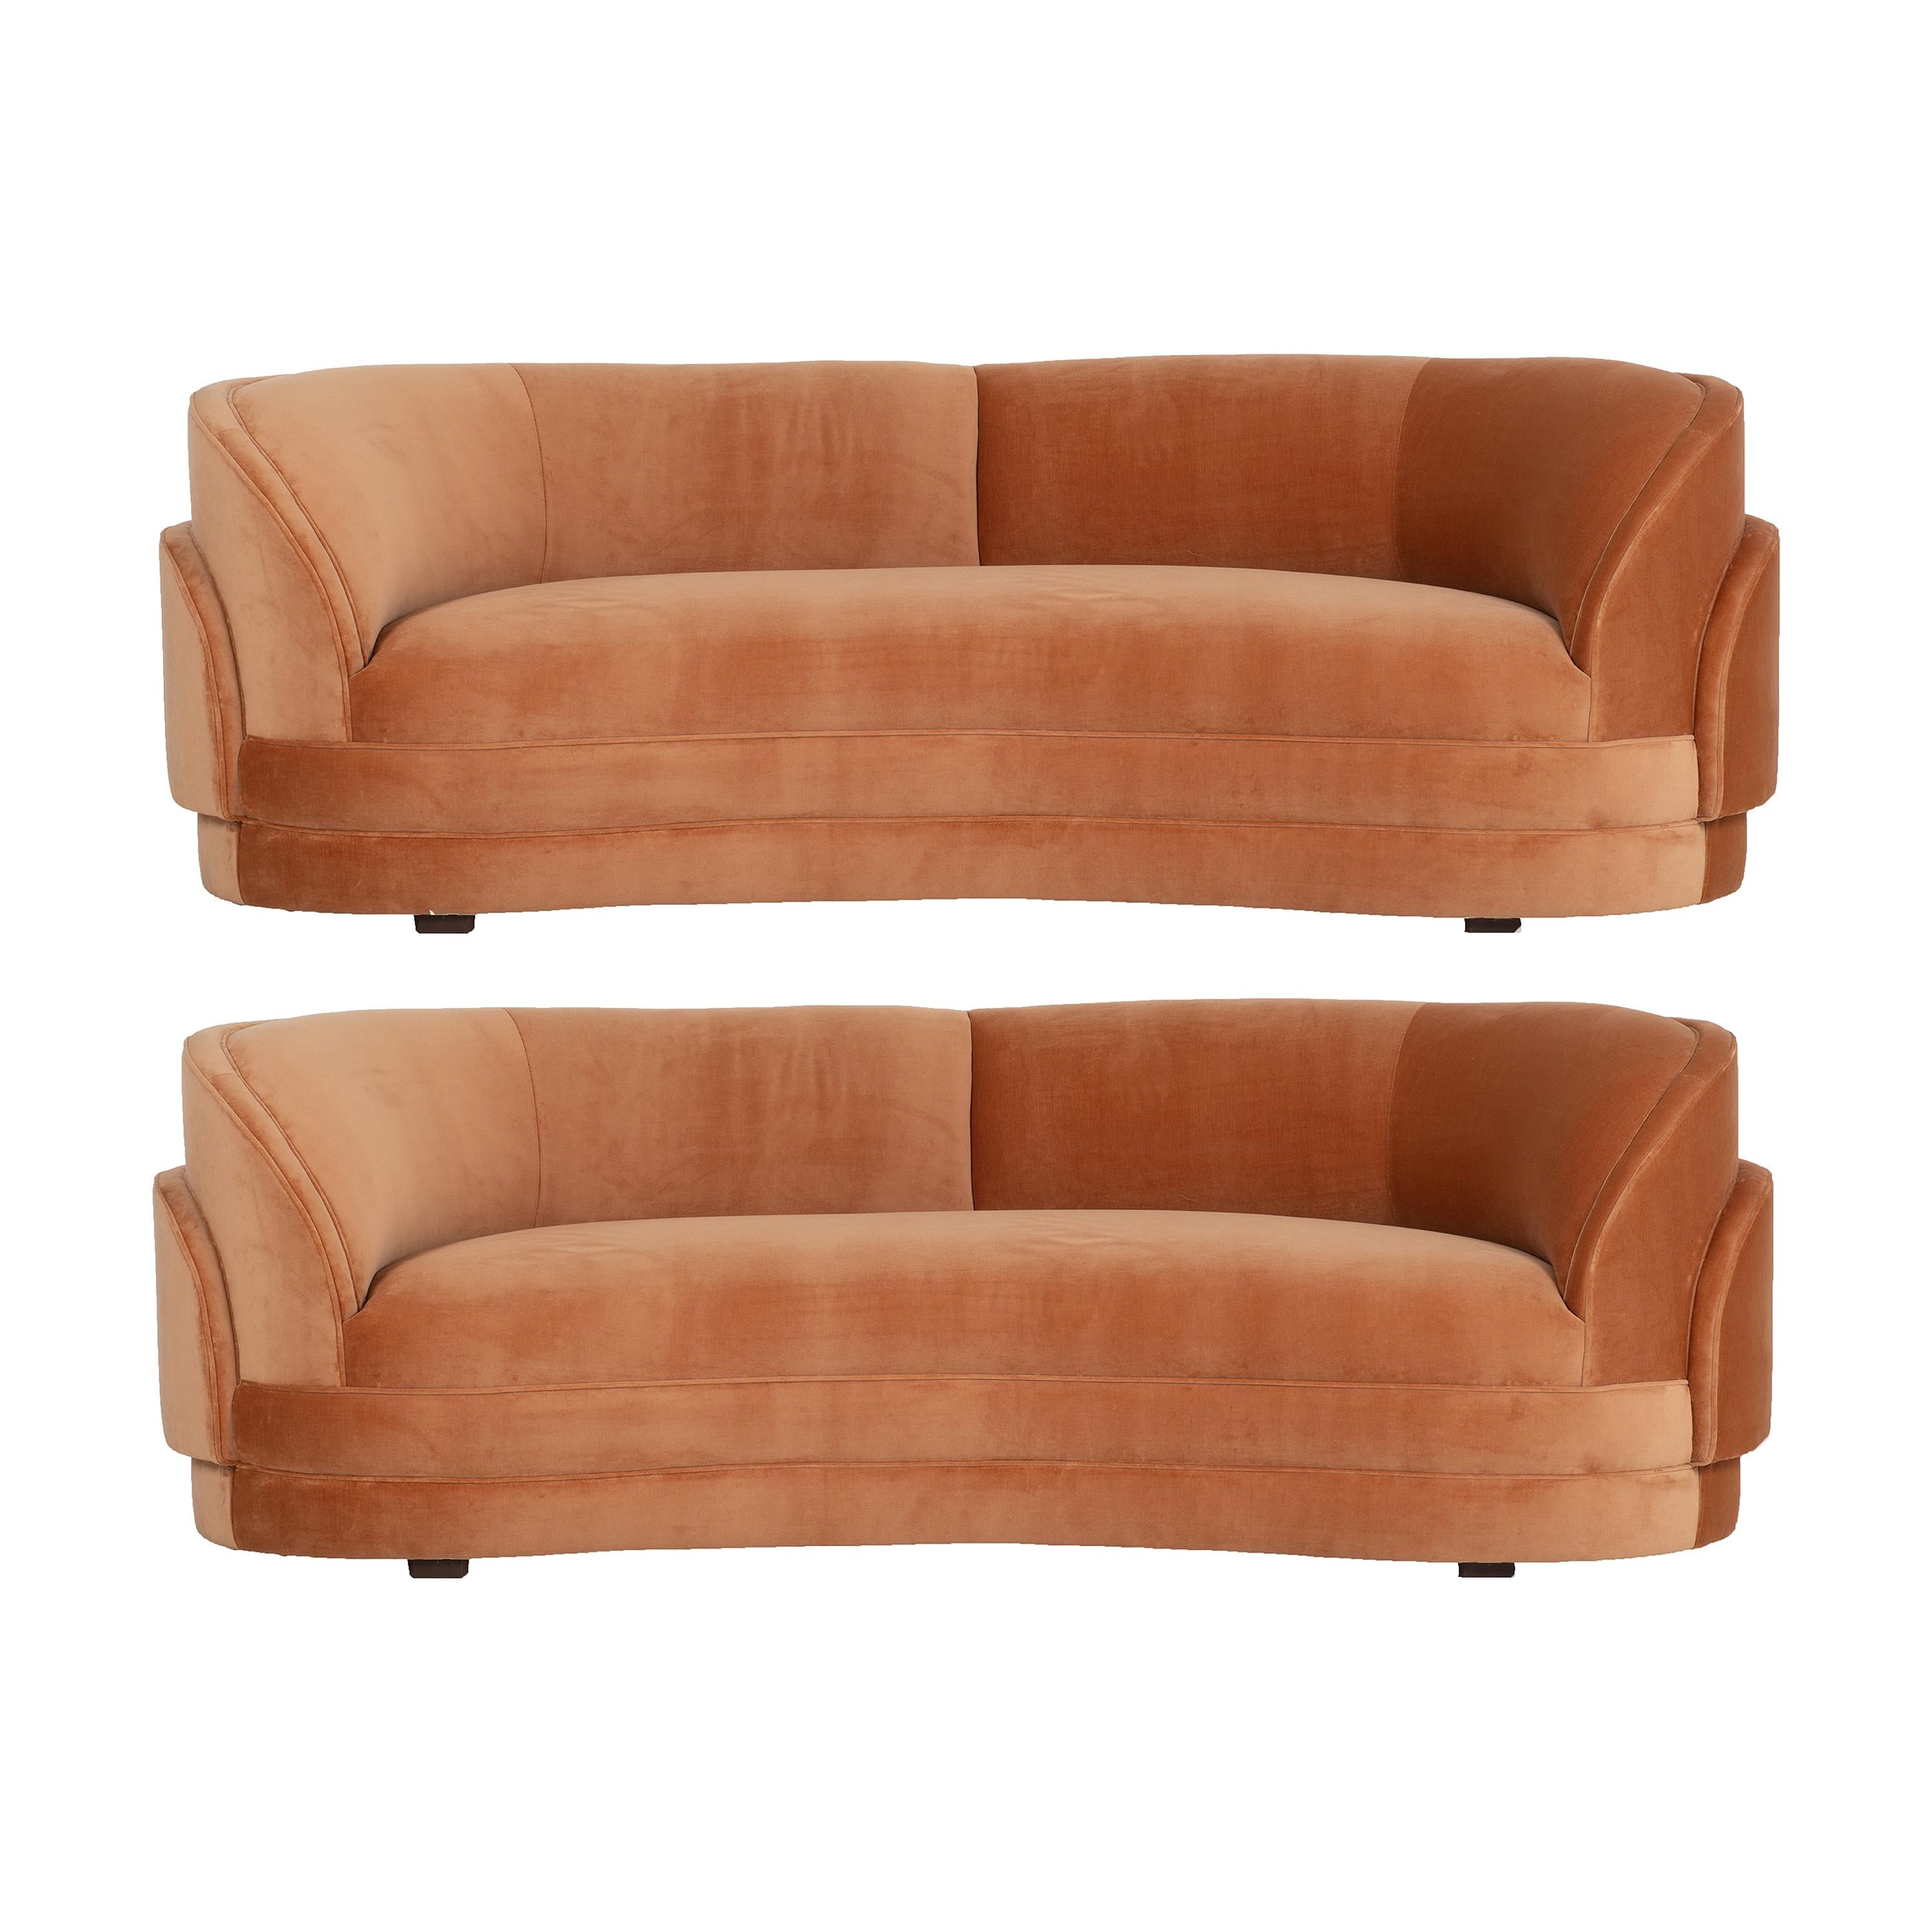 Pair of Mid-Century Style Curved Sofas